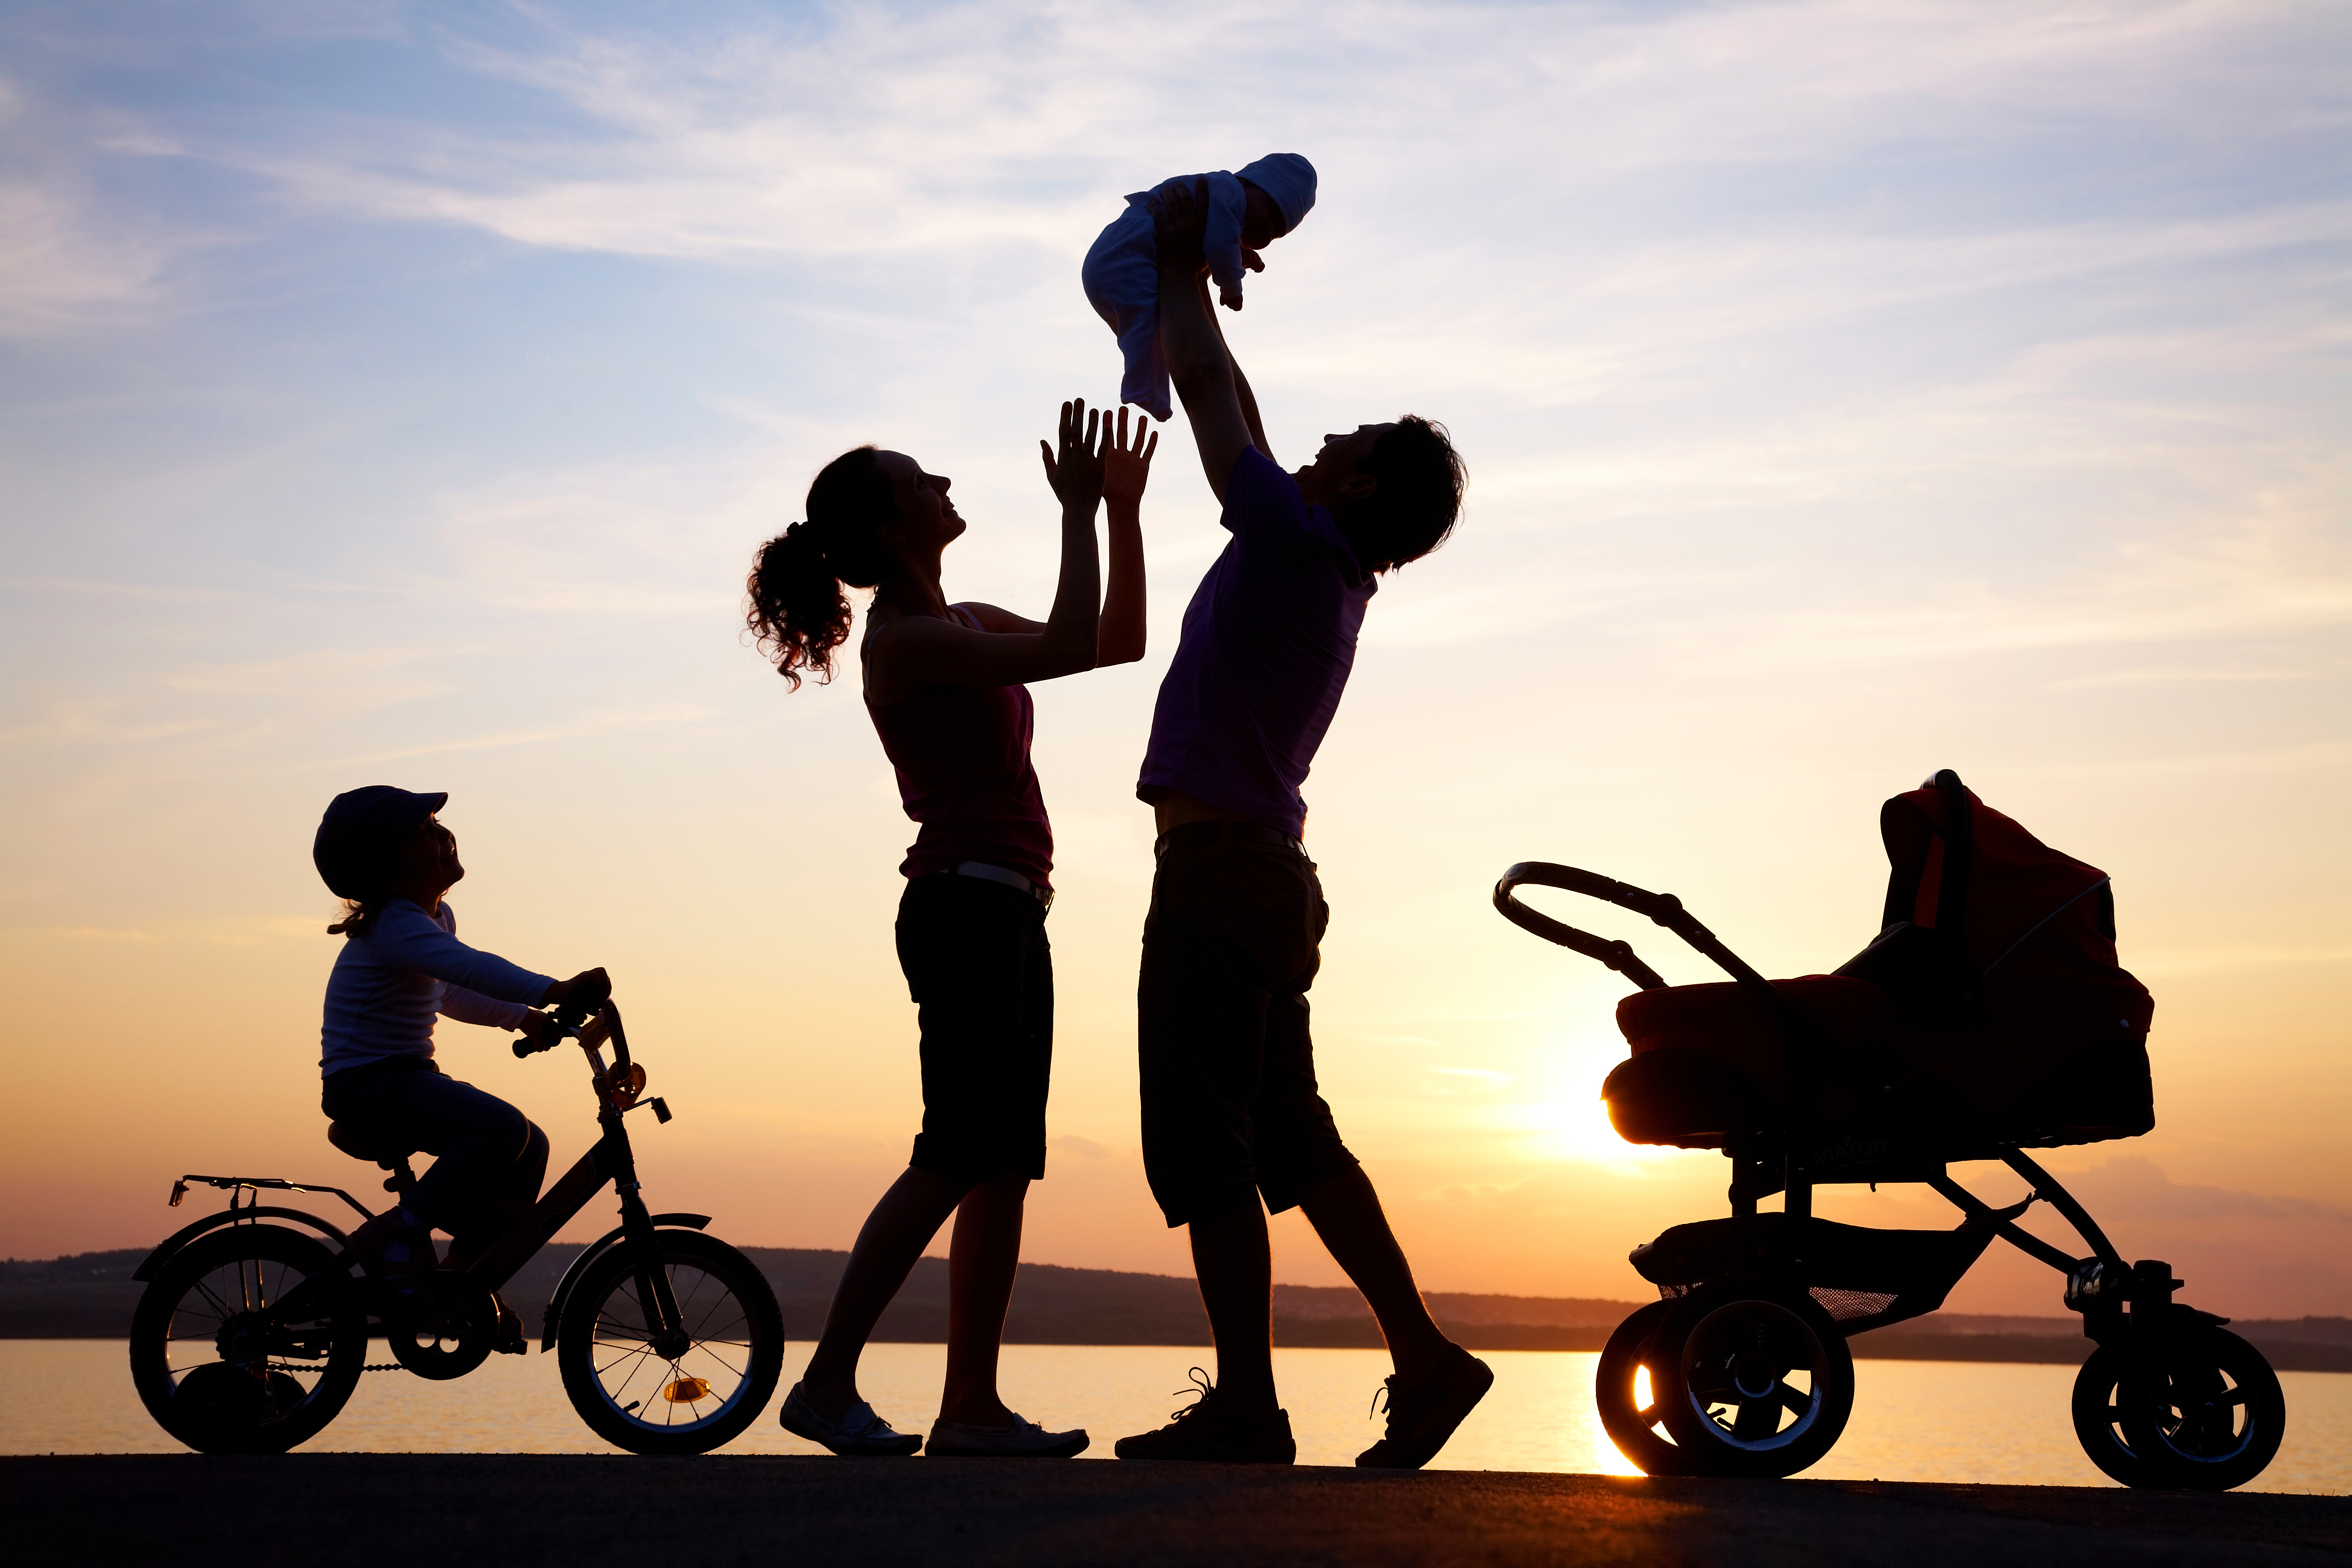 A silhouette of a happy family | Source: Shutterstock